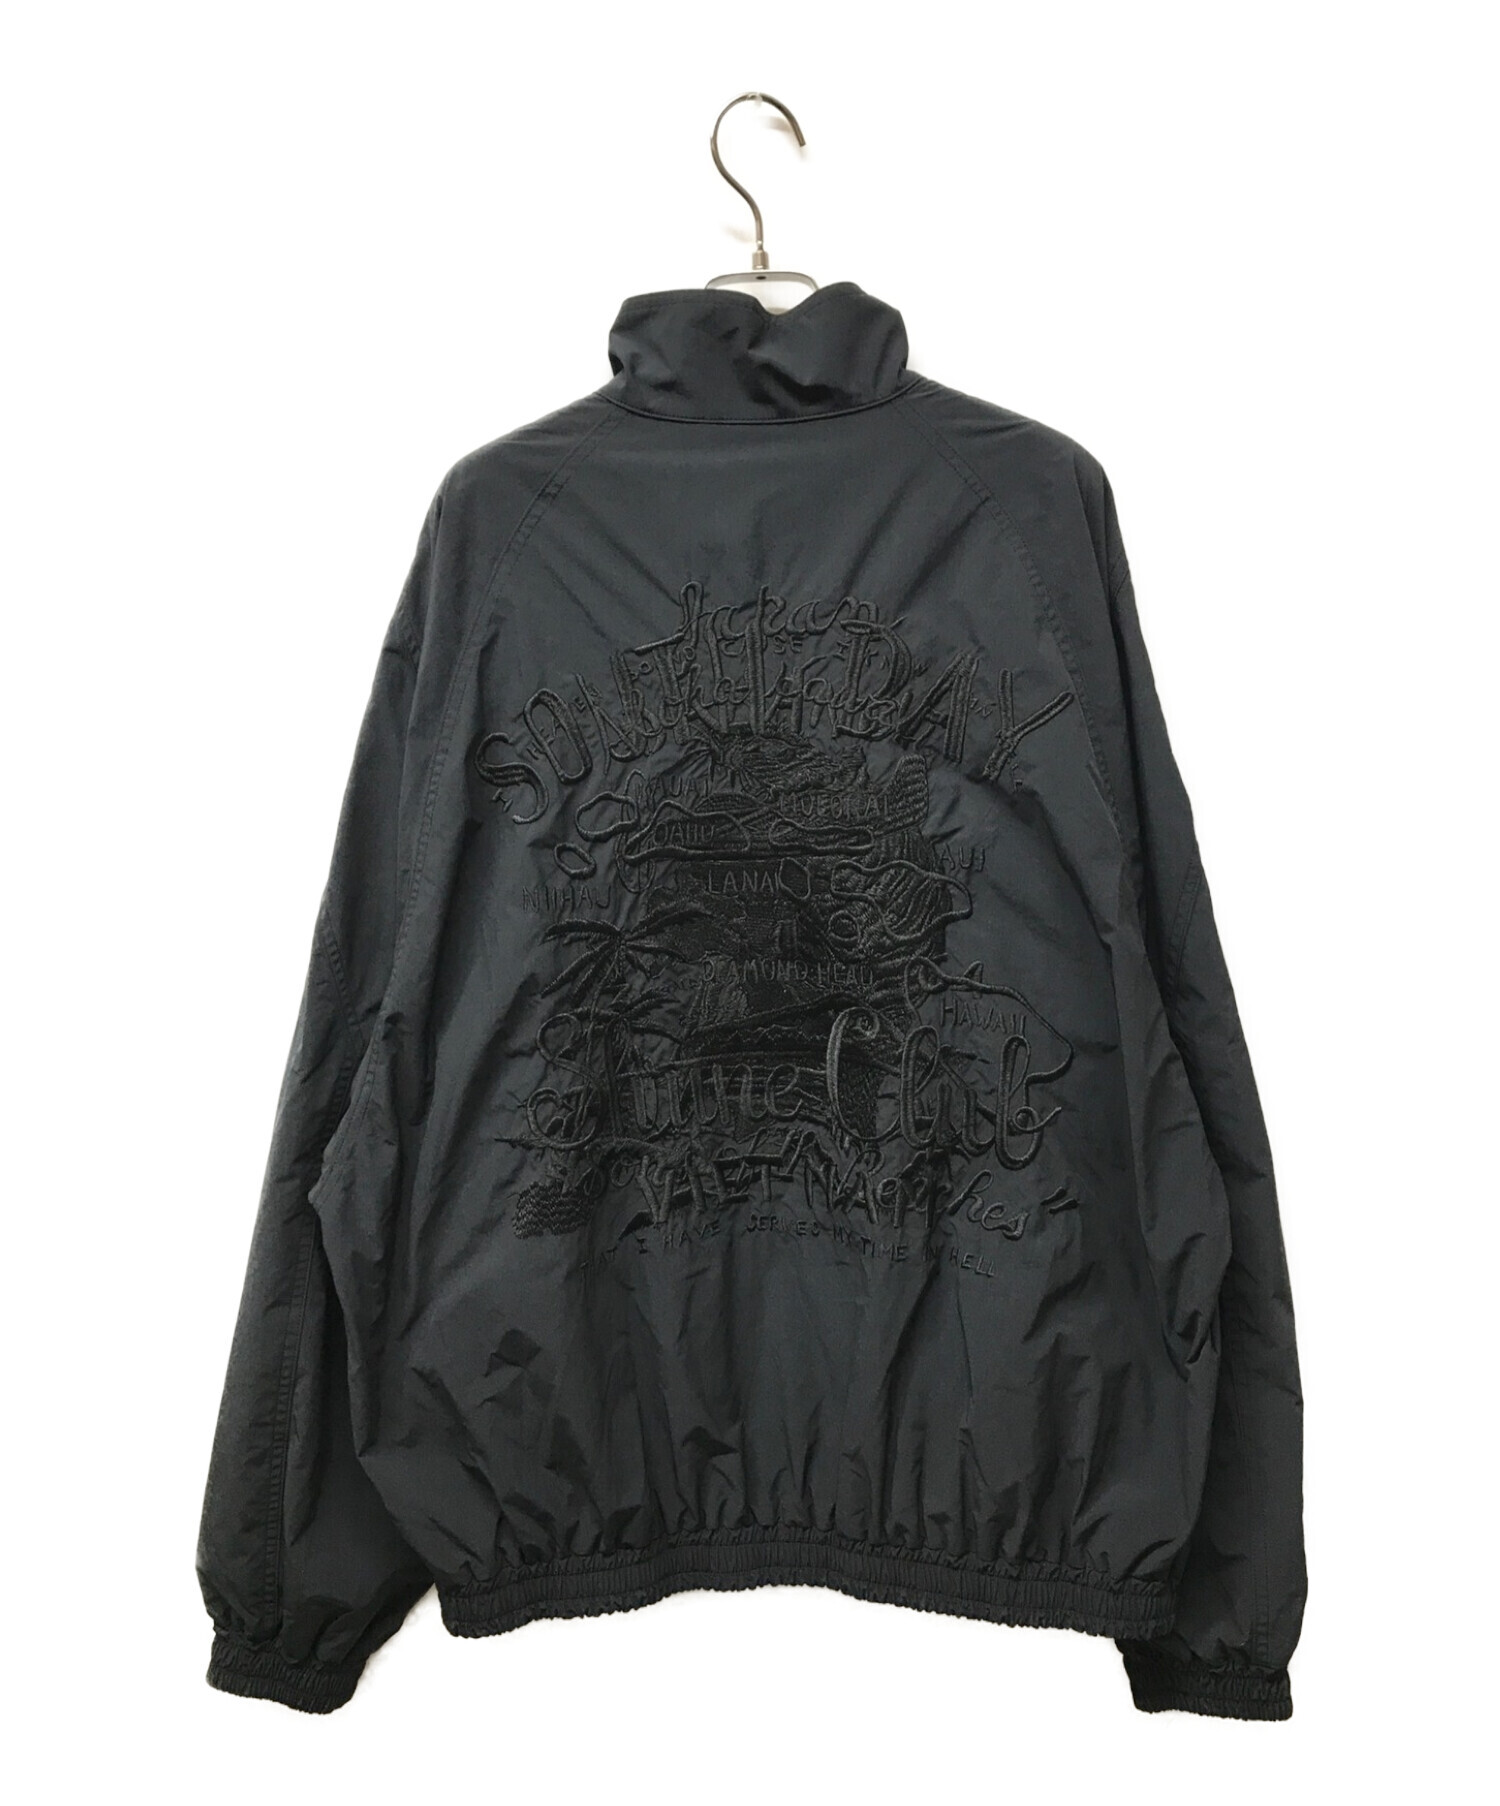 doublet (ダブレット) CHAOS EMBROIDERY TRACK JACKET カオス刺繍トラックジャケット 23AW08BL171  23AW ブラック サイズ:S